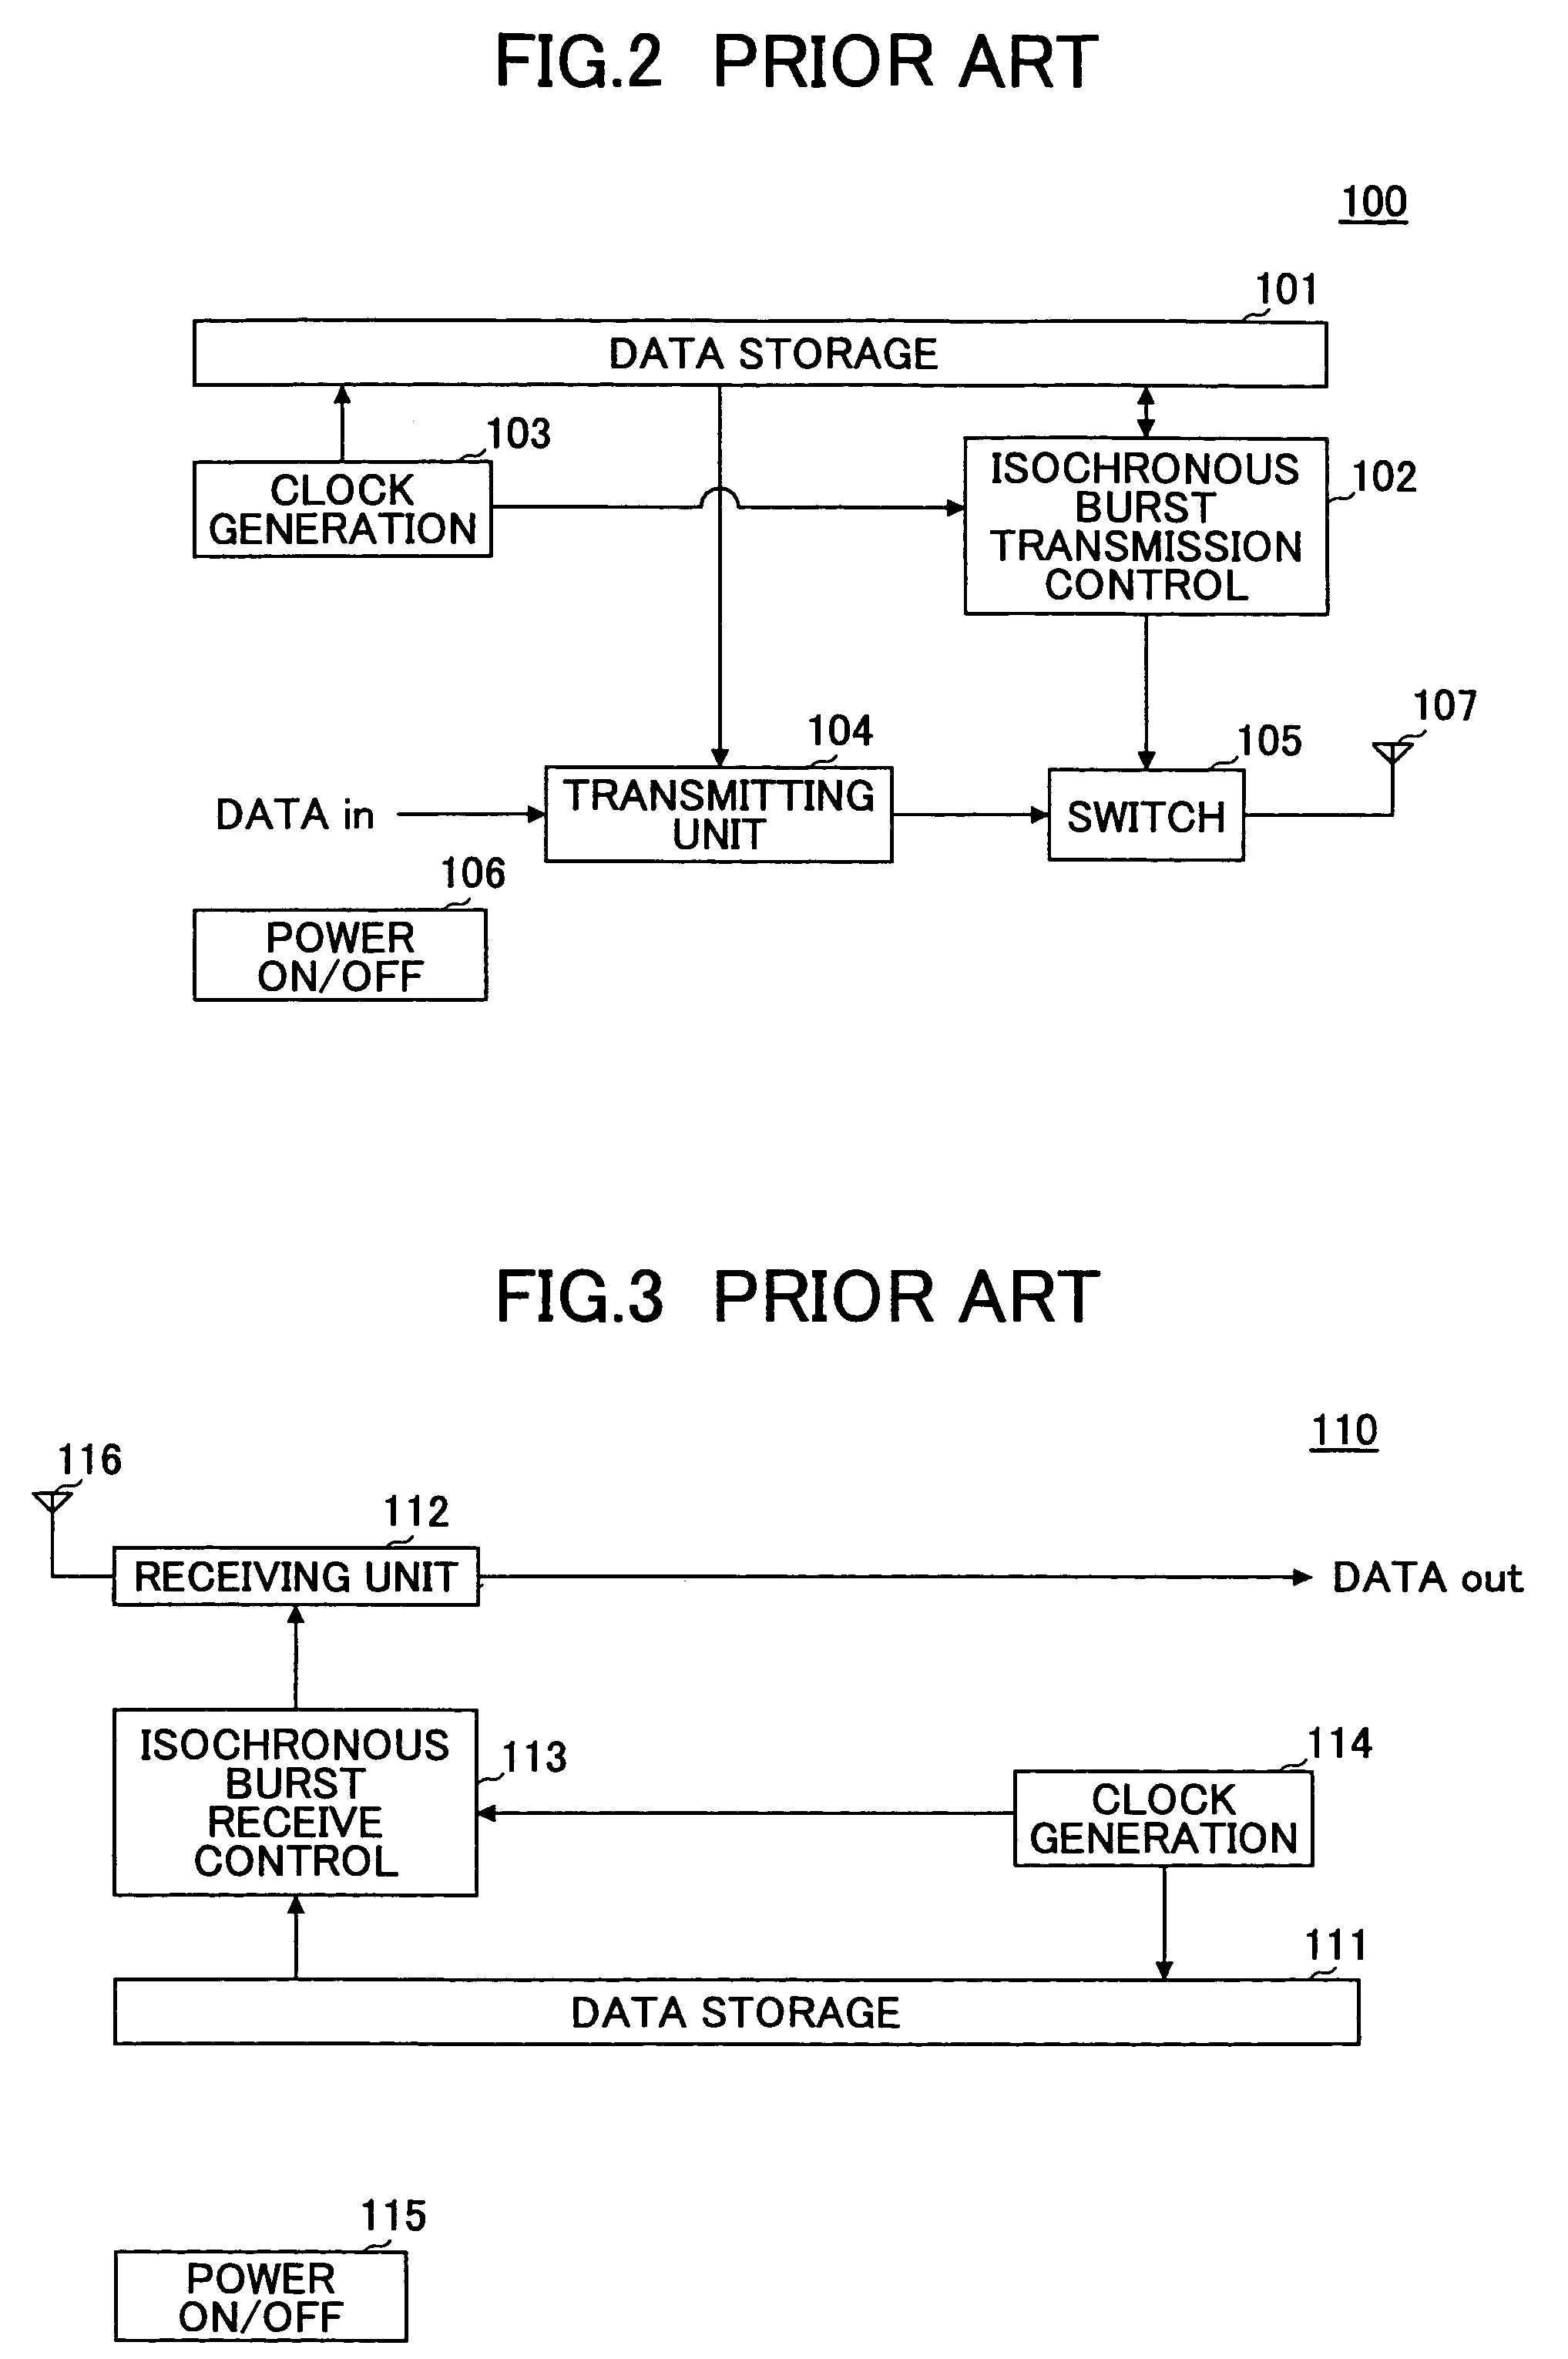 Wireless communications system, transmitting station, and receiving station